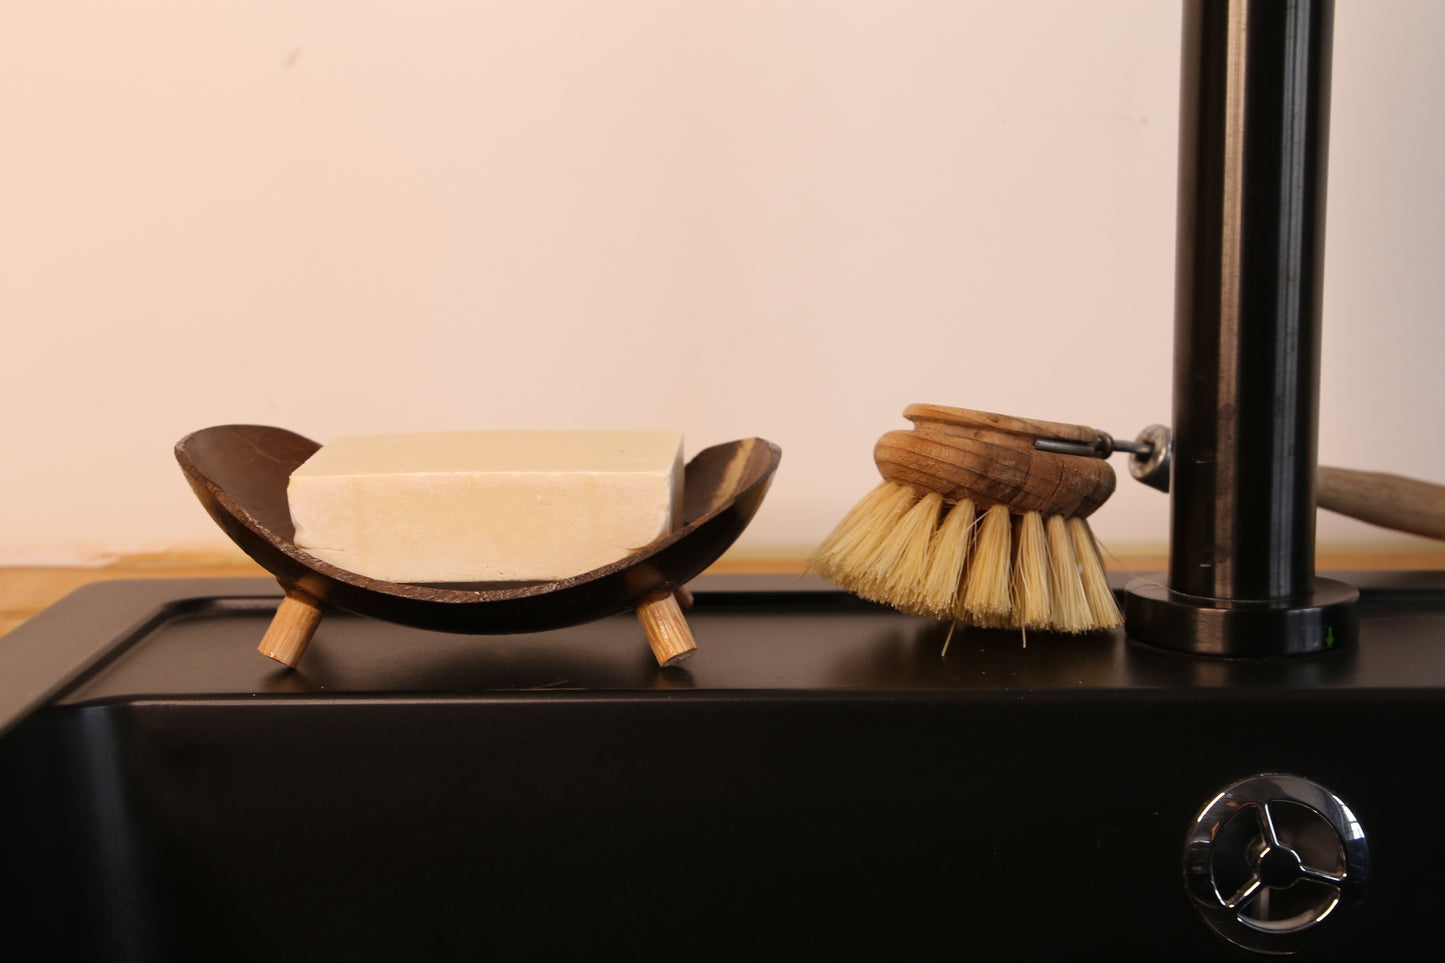 Coconut shell soap dish | Soap container